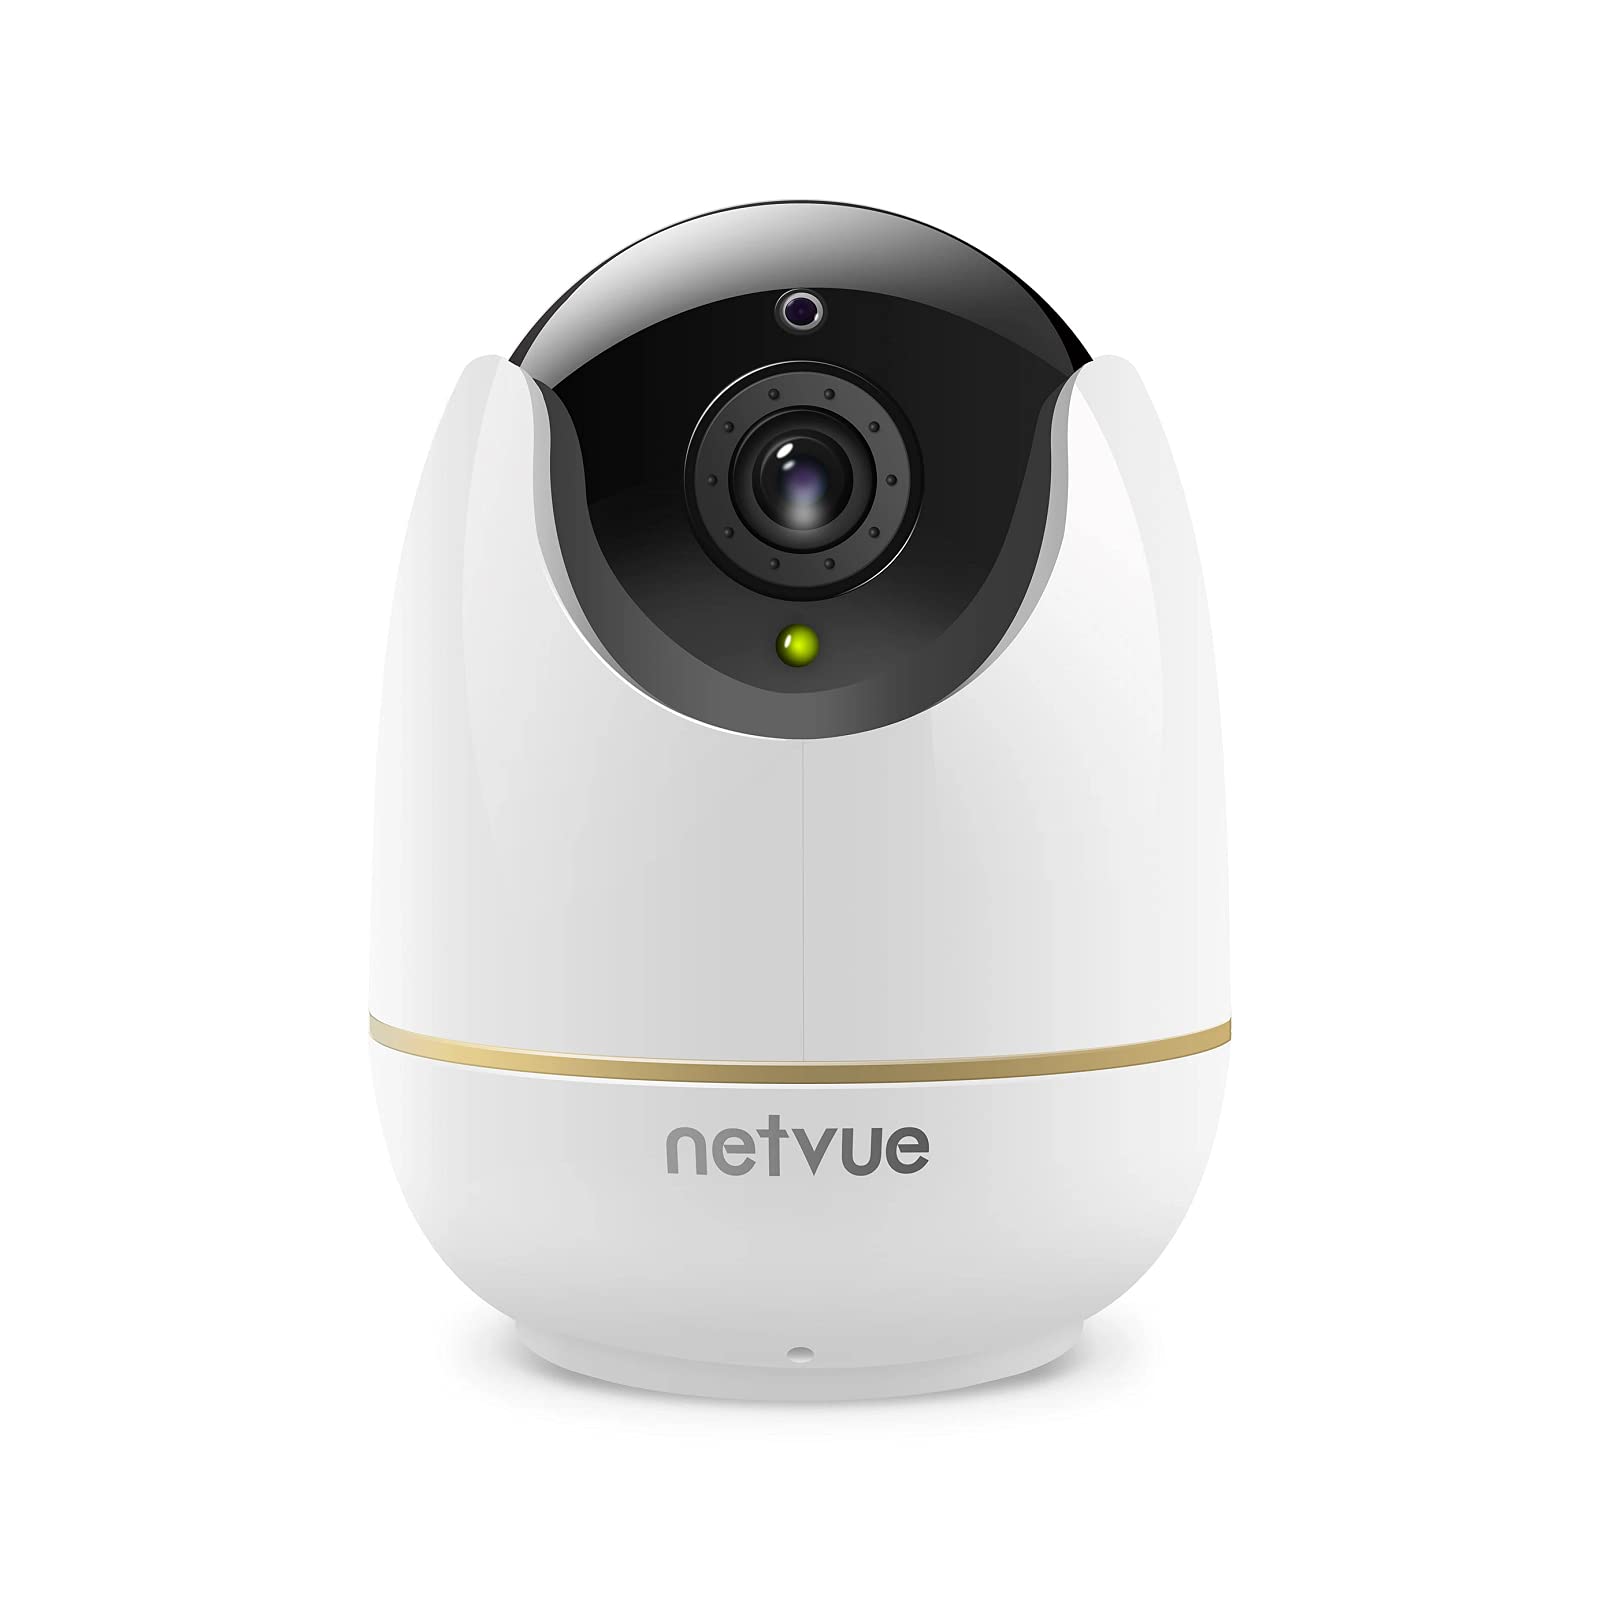 NETVUE Wi-Fi Camera, Indoor Security Camera, Smart Home Camera for Pet/Elderly/Dog/Baby Monitor, 360° Pan, IR Night Vision, 2-Way Audio, Motion Detection & Alerts, Compatible with Alexa,2.4ghz Wifi